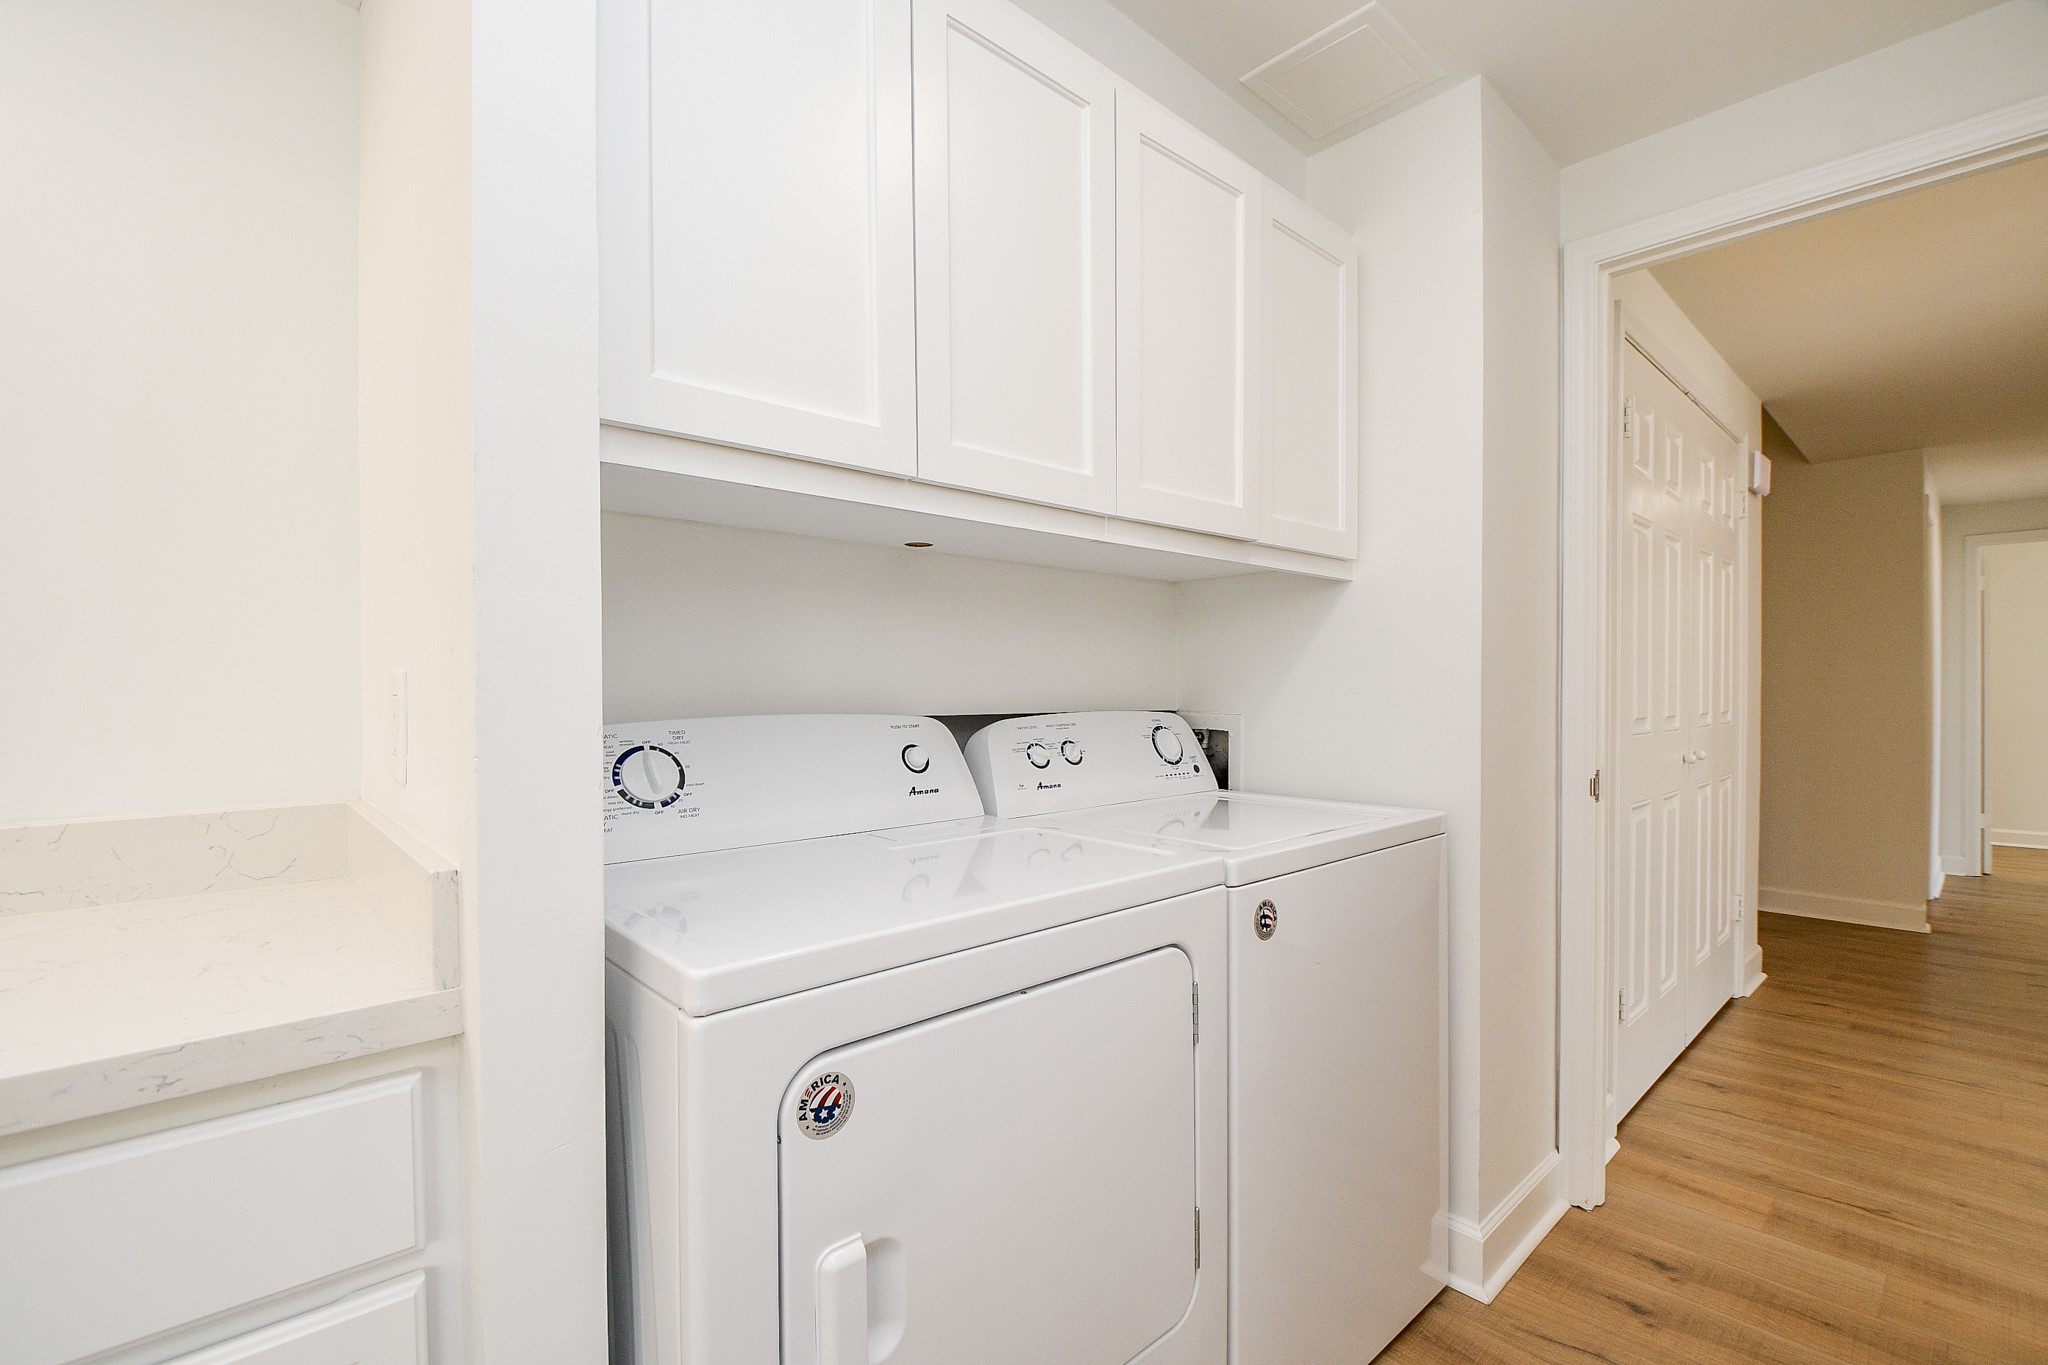 The washer and dryer are located in this adjacent hallway to the kitchen.